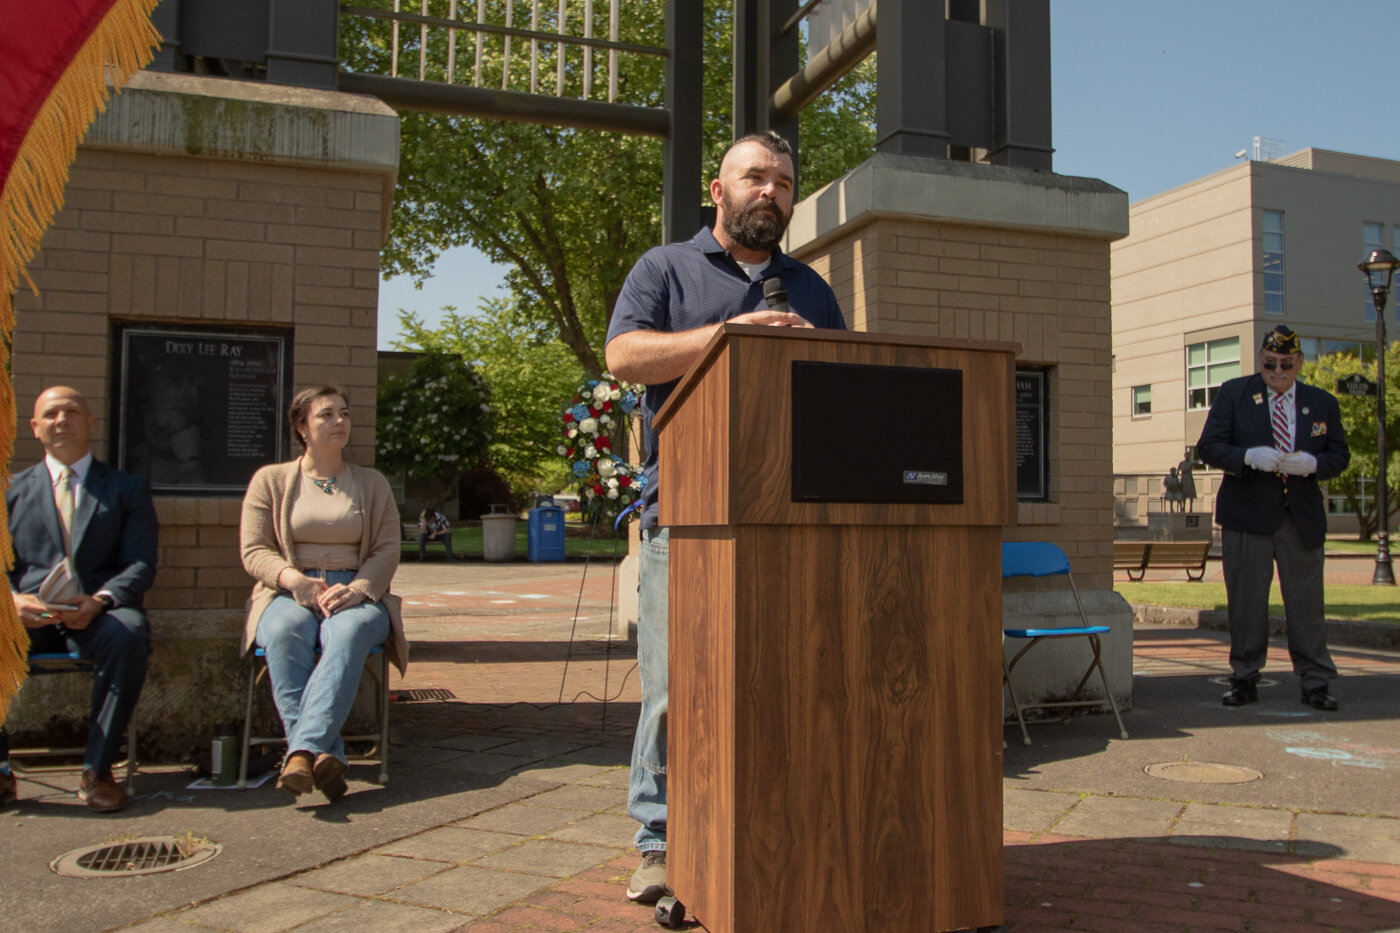 Centralia College student and campus Vet Corps navigator Paul Murphy talks at the college's Memorial Day ceremony Thursday morning by the campus clock tower.